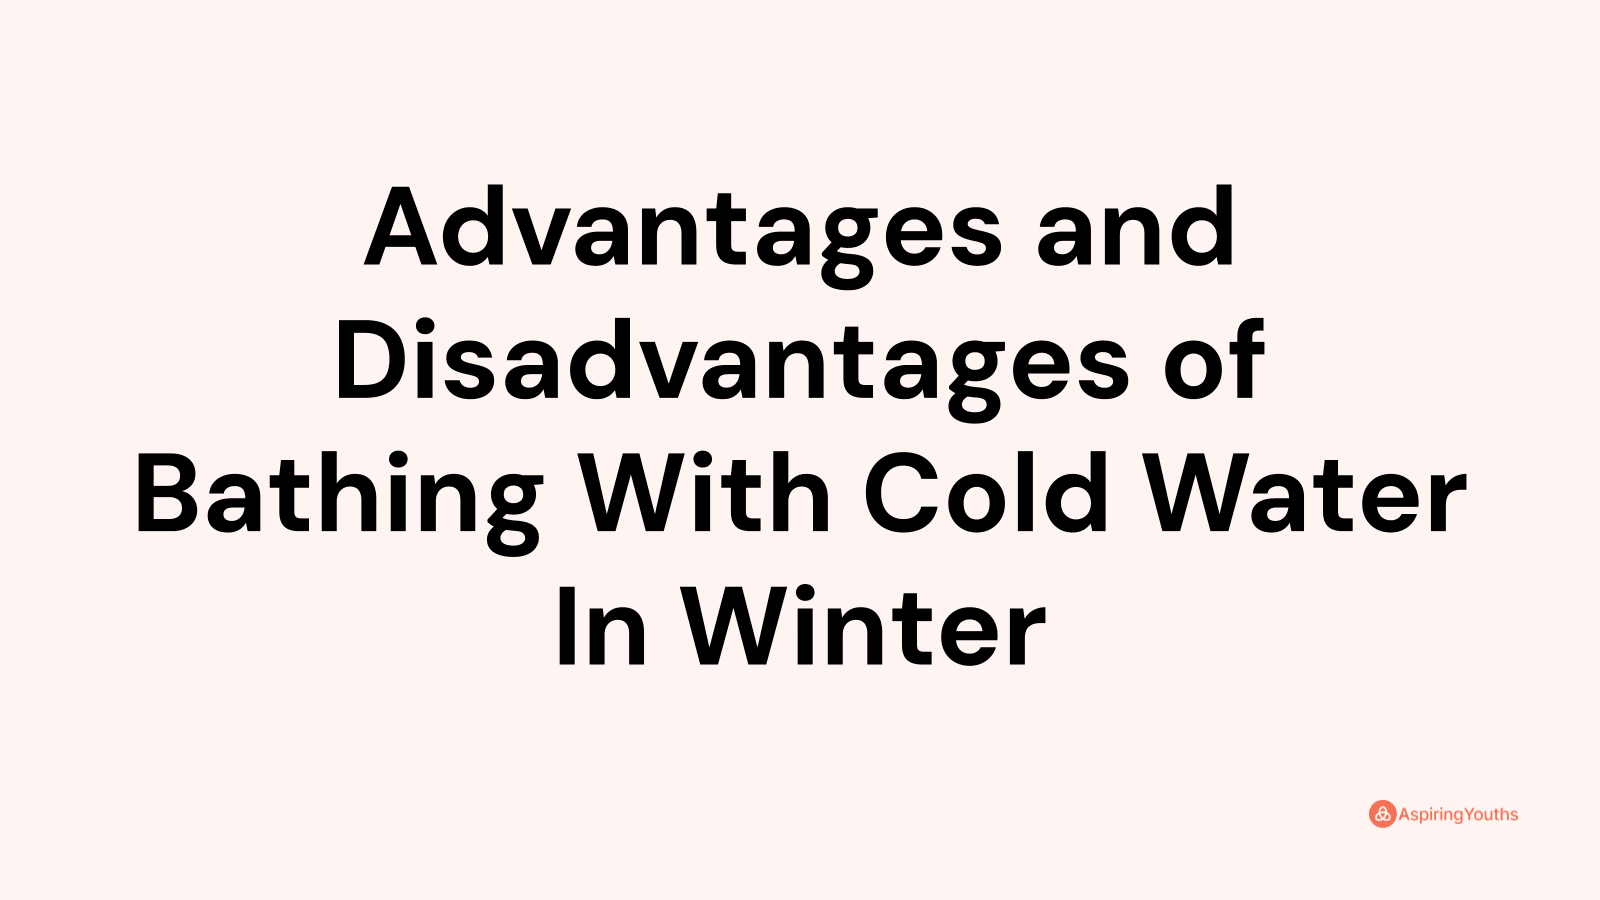 Advantages and disadvantages of Bathing With Cold Water In Winter